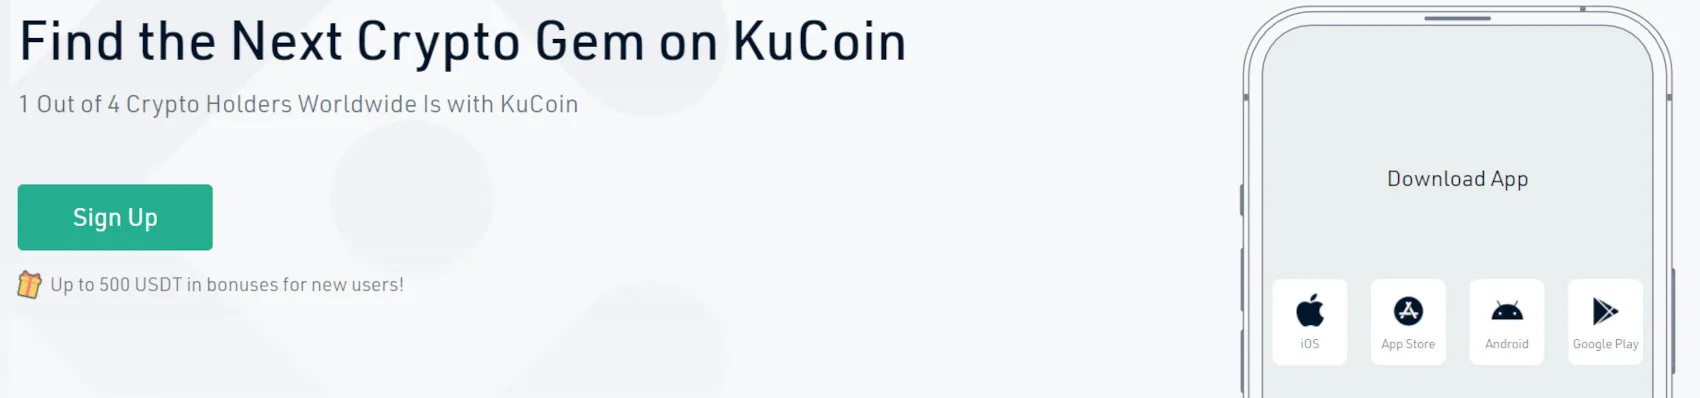 KuCoin welcome offer to new users